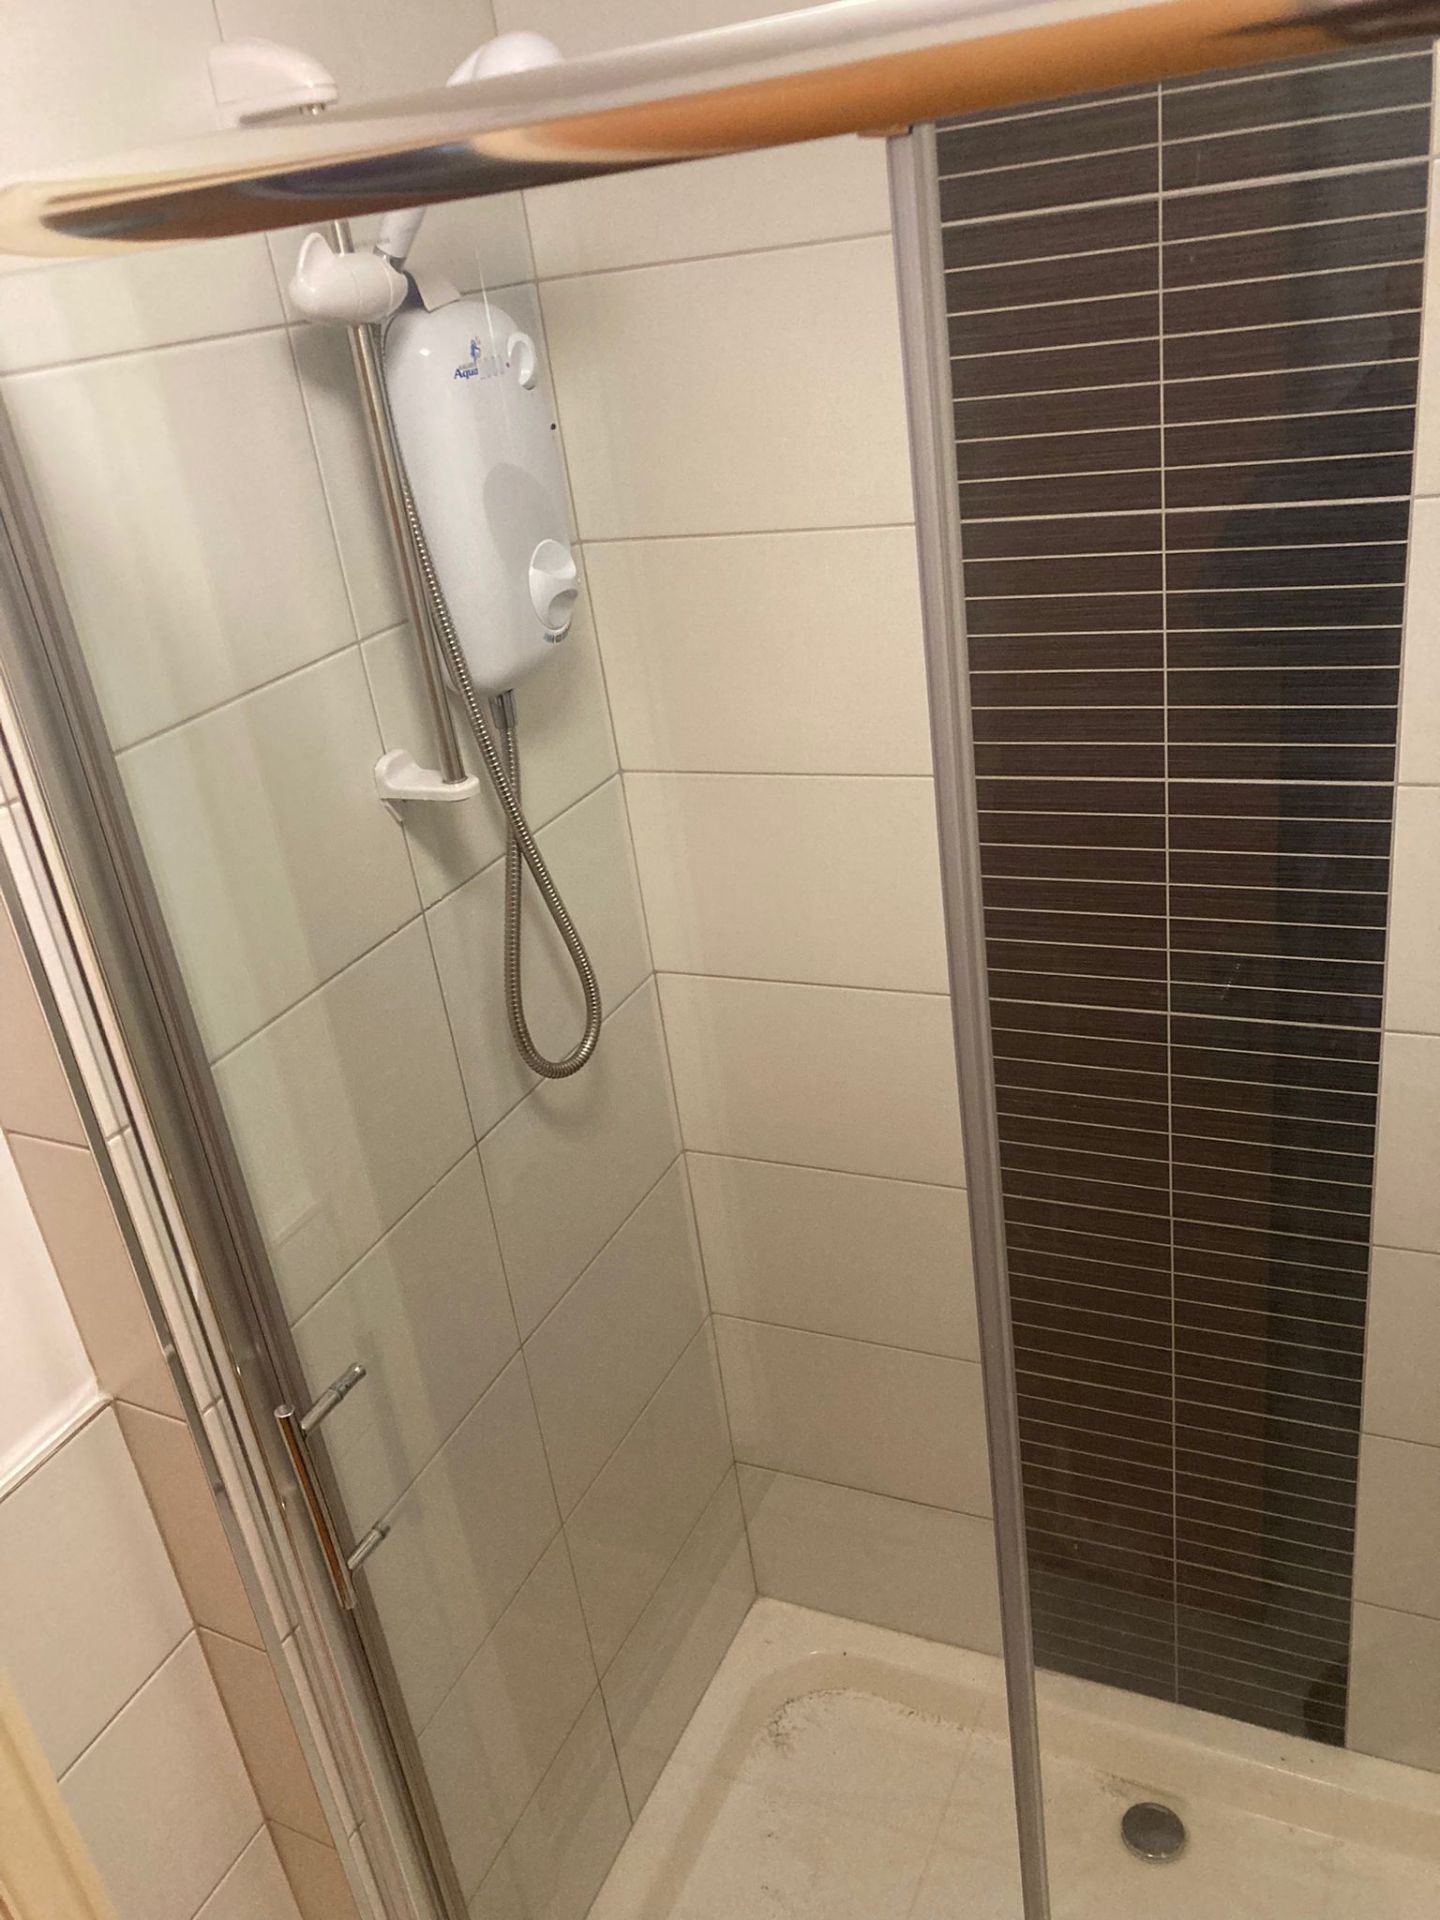 1 x Wall Mounted Shower Unit With Cubicle Door And Profile Panel